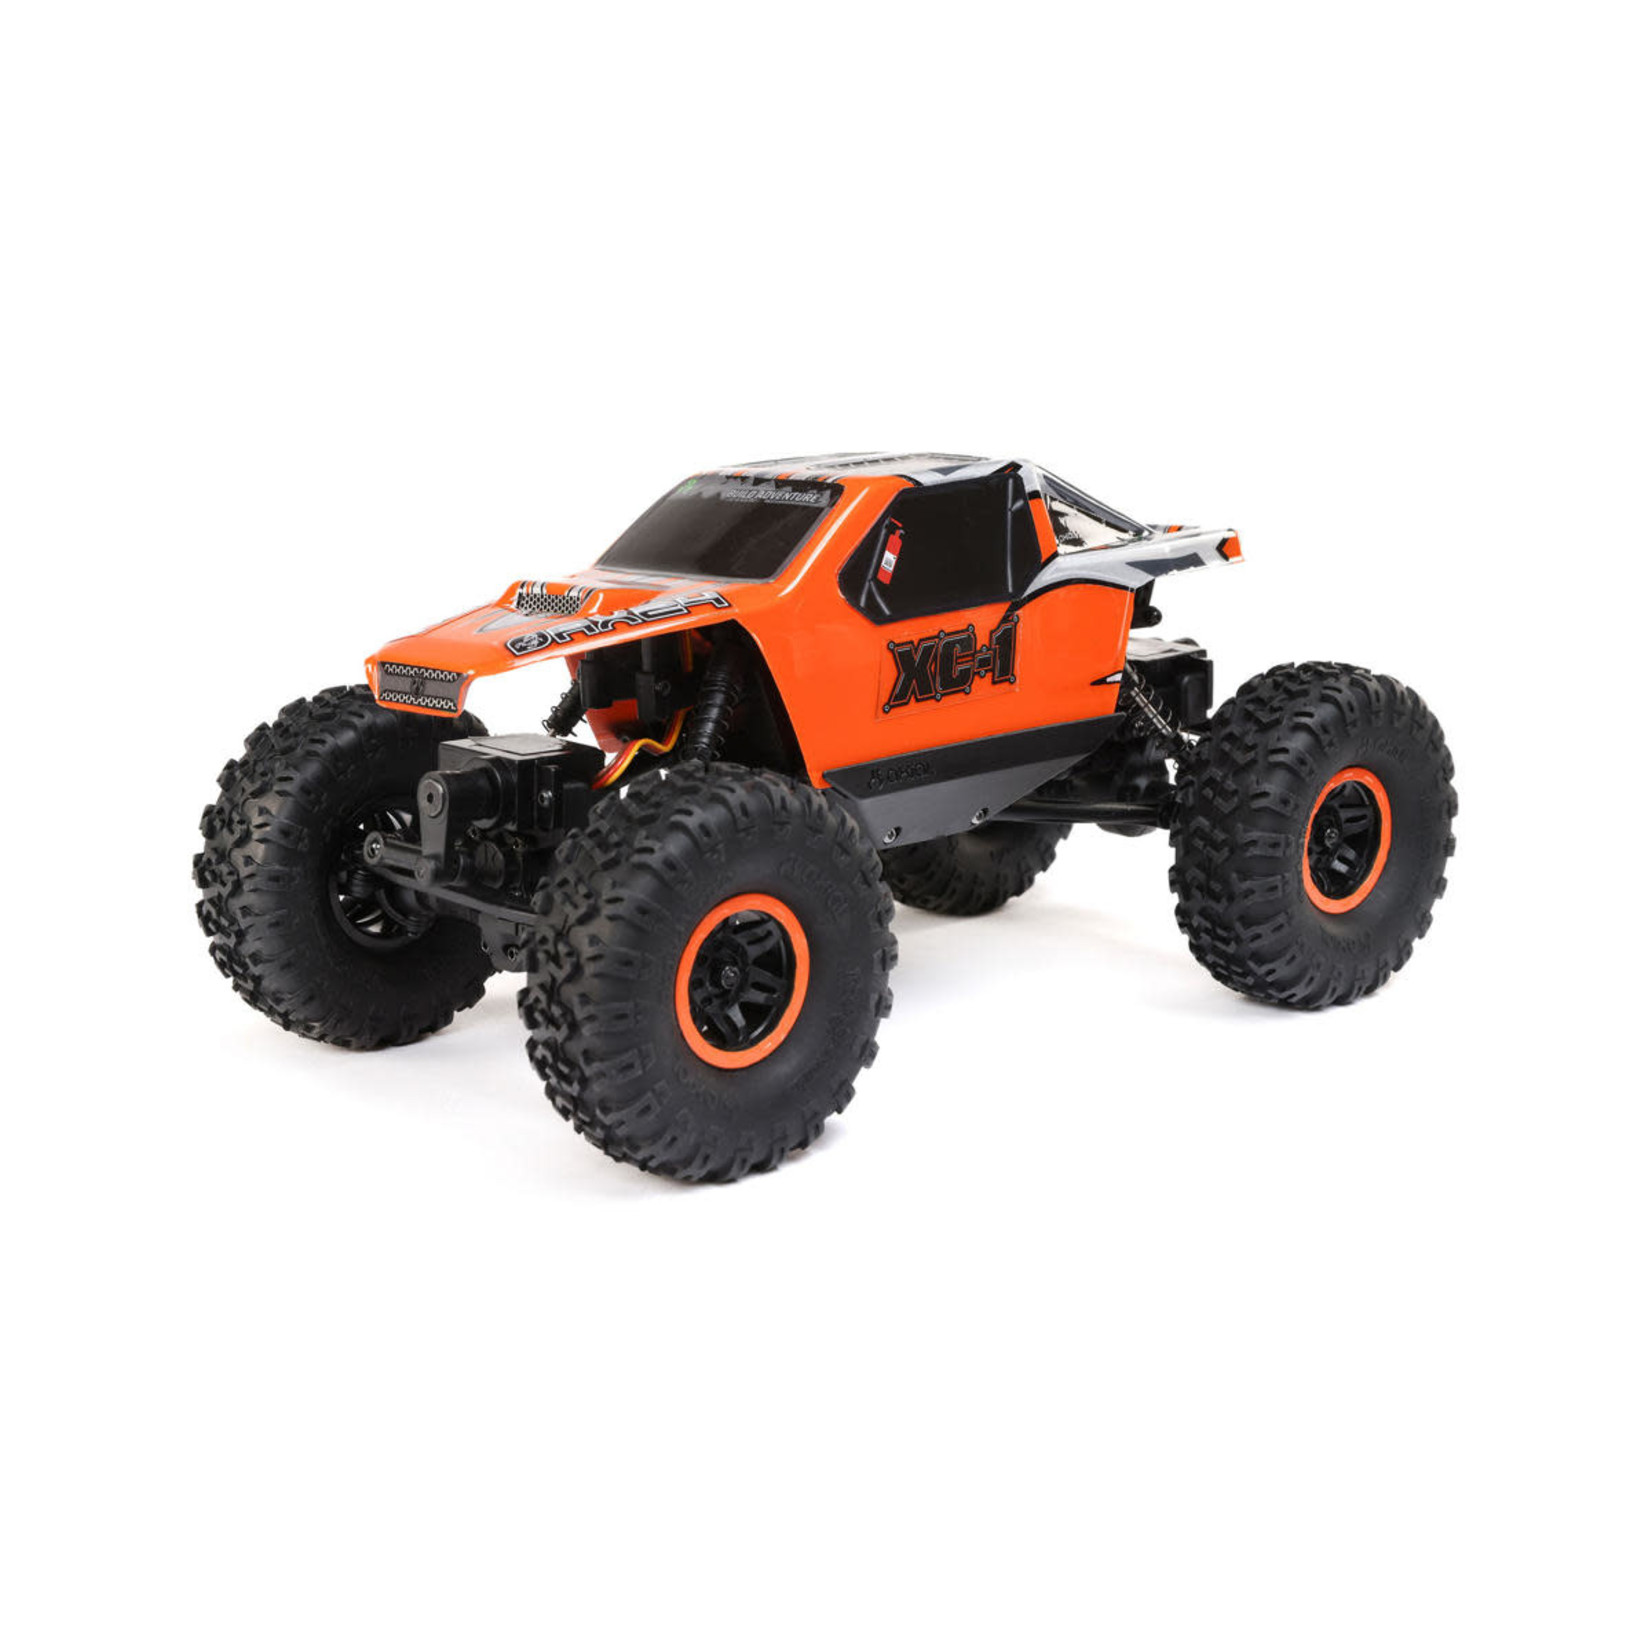 Axial Axial AX24 XC-1 1/24 4WD RTR 4WS Mini Crawler (Orange) w/2.4GHz Radio, Battery & Charger #AXI00003T2